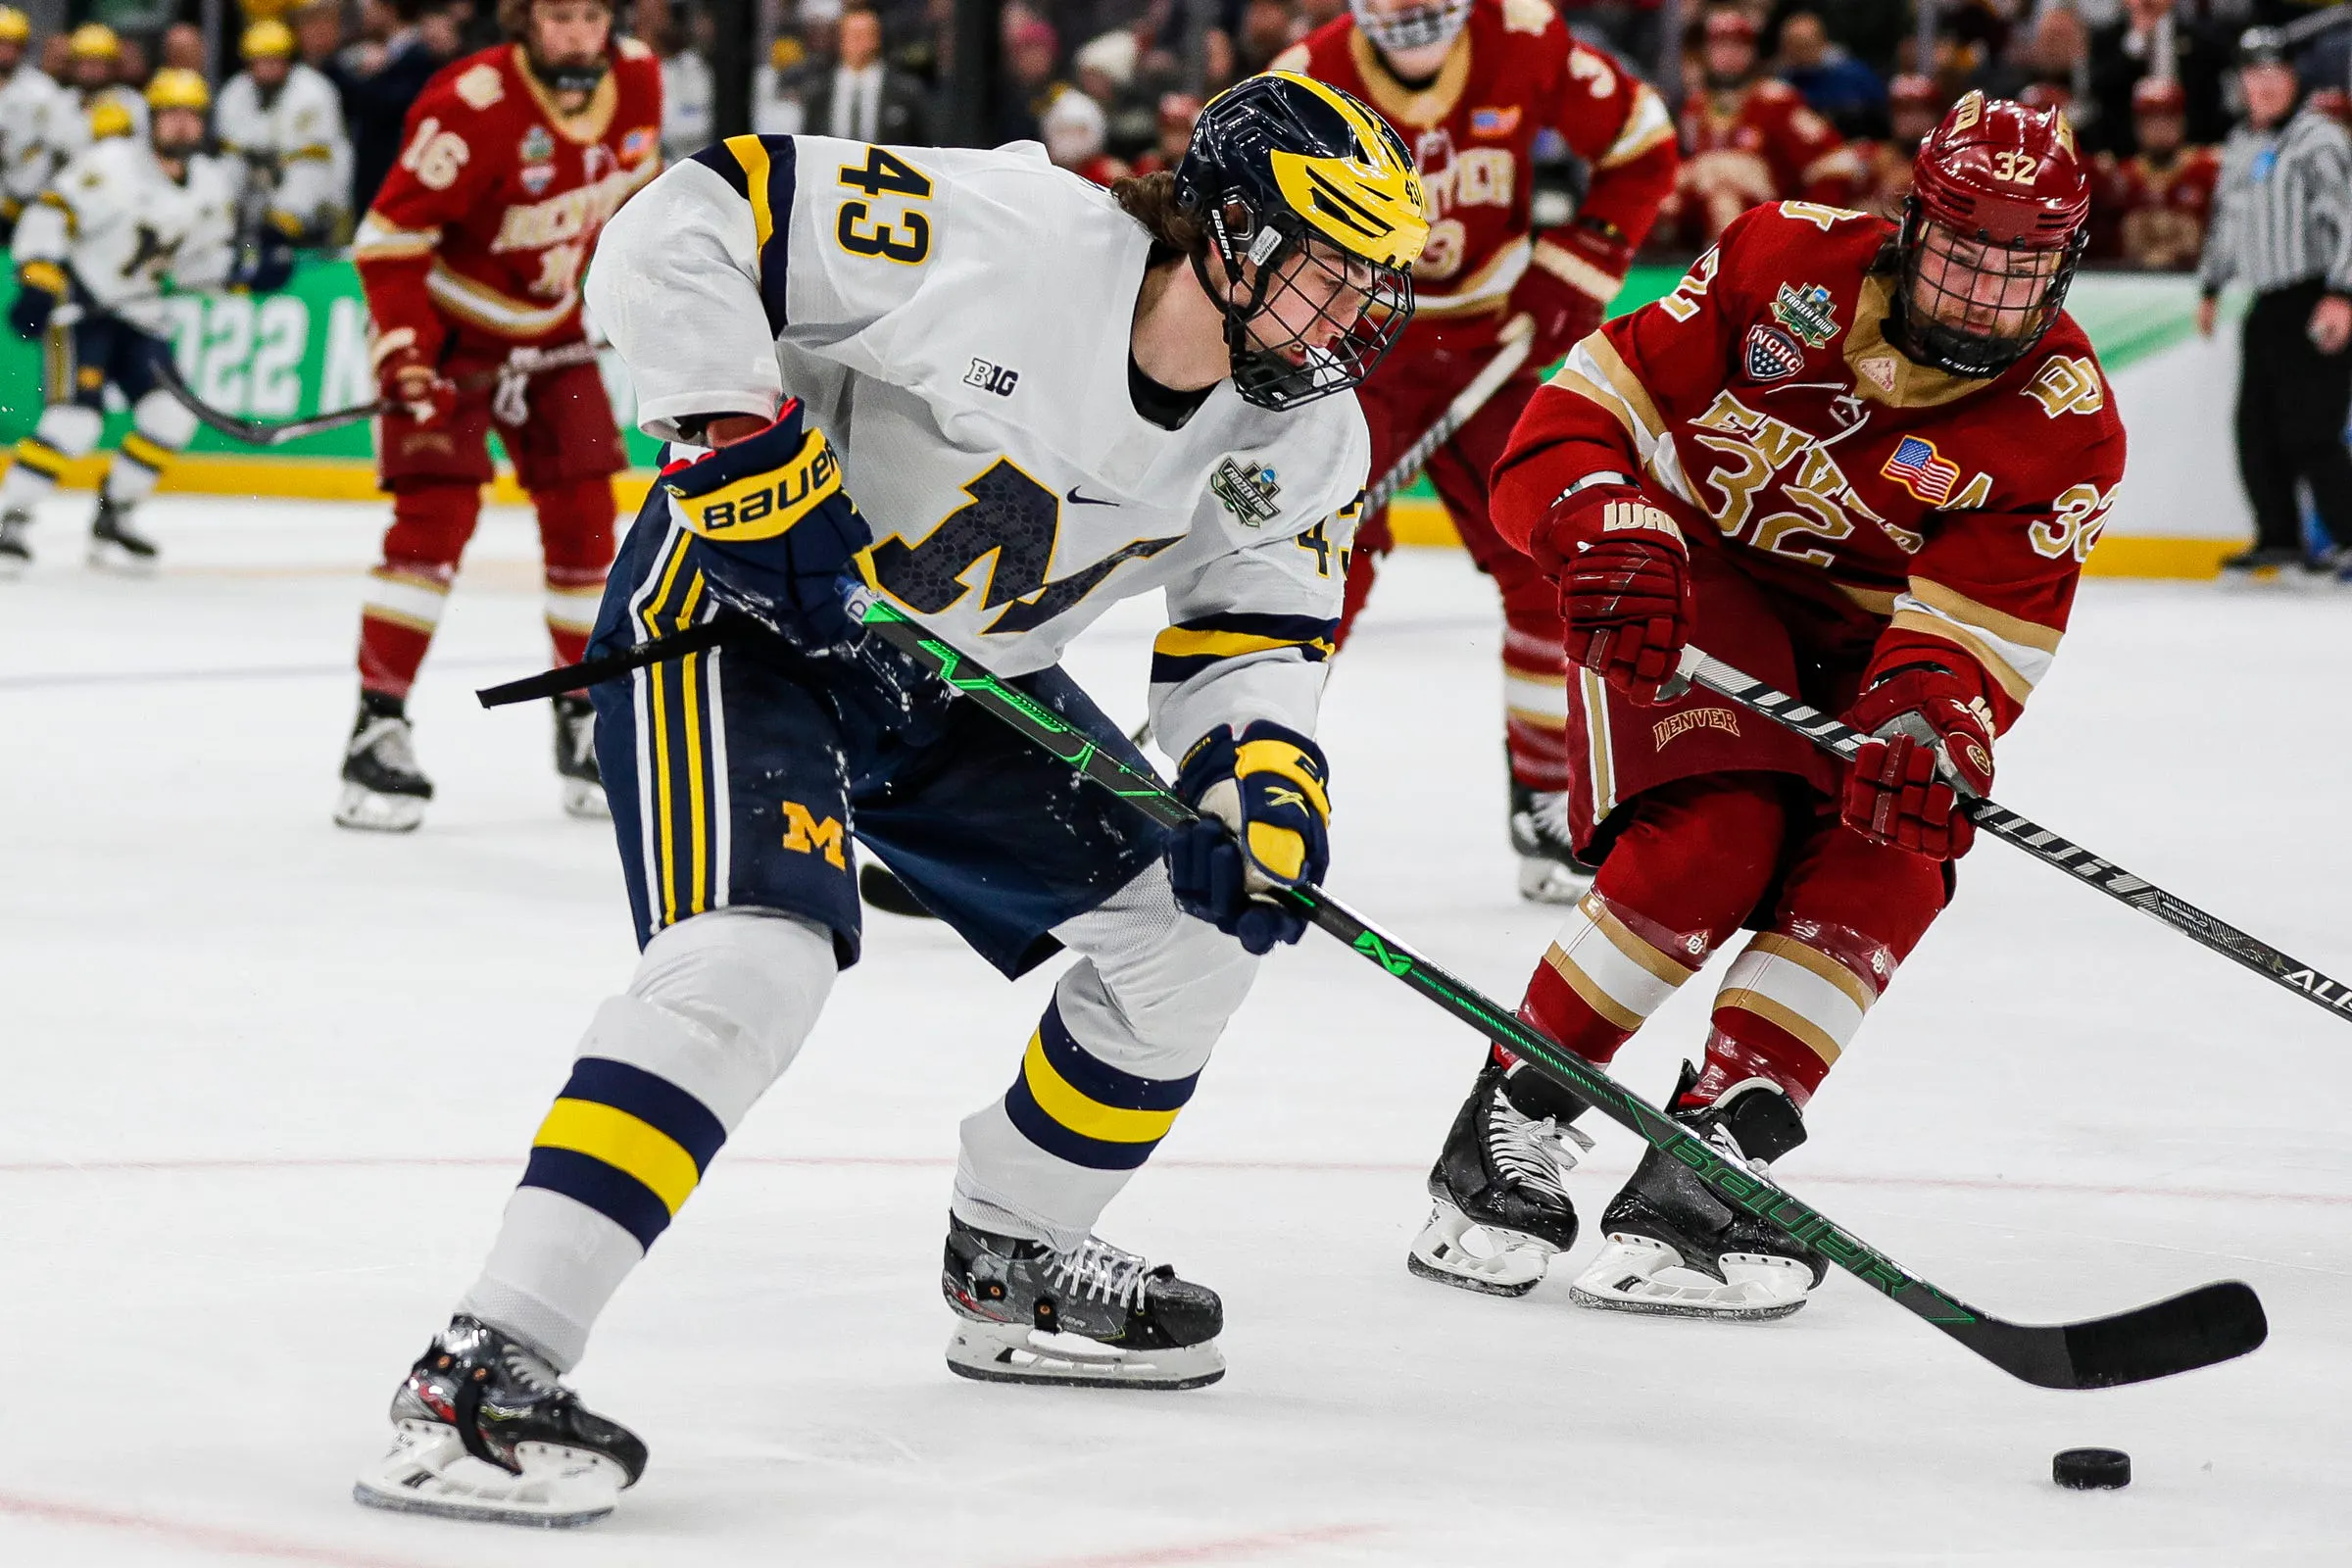 NCAA men’s hockey regional championship preview: Breaking down the NHL prospects